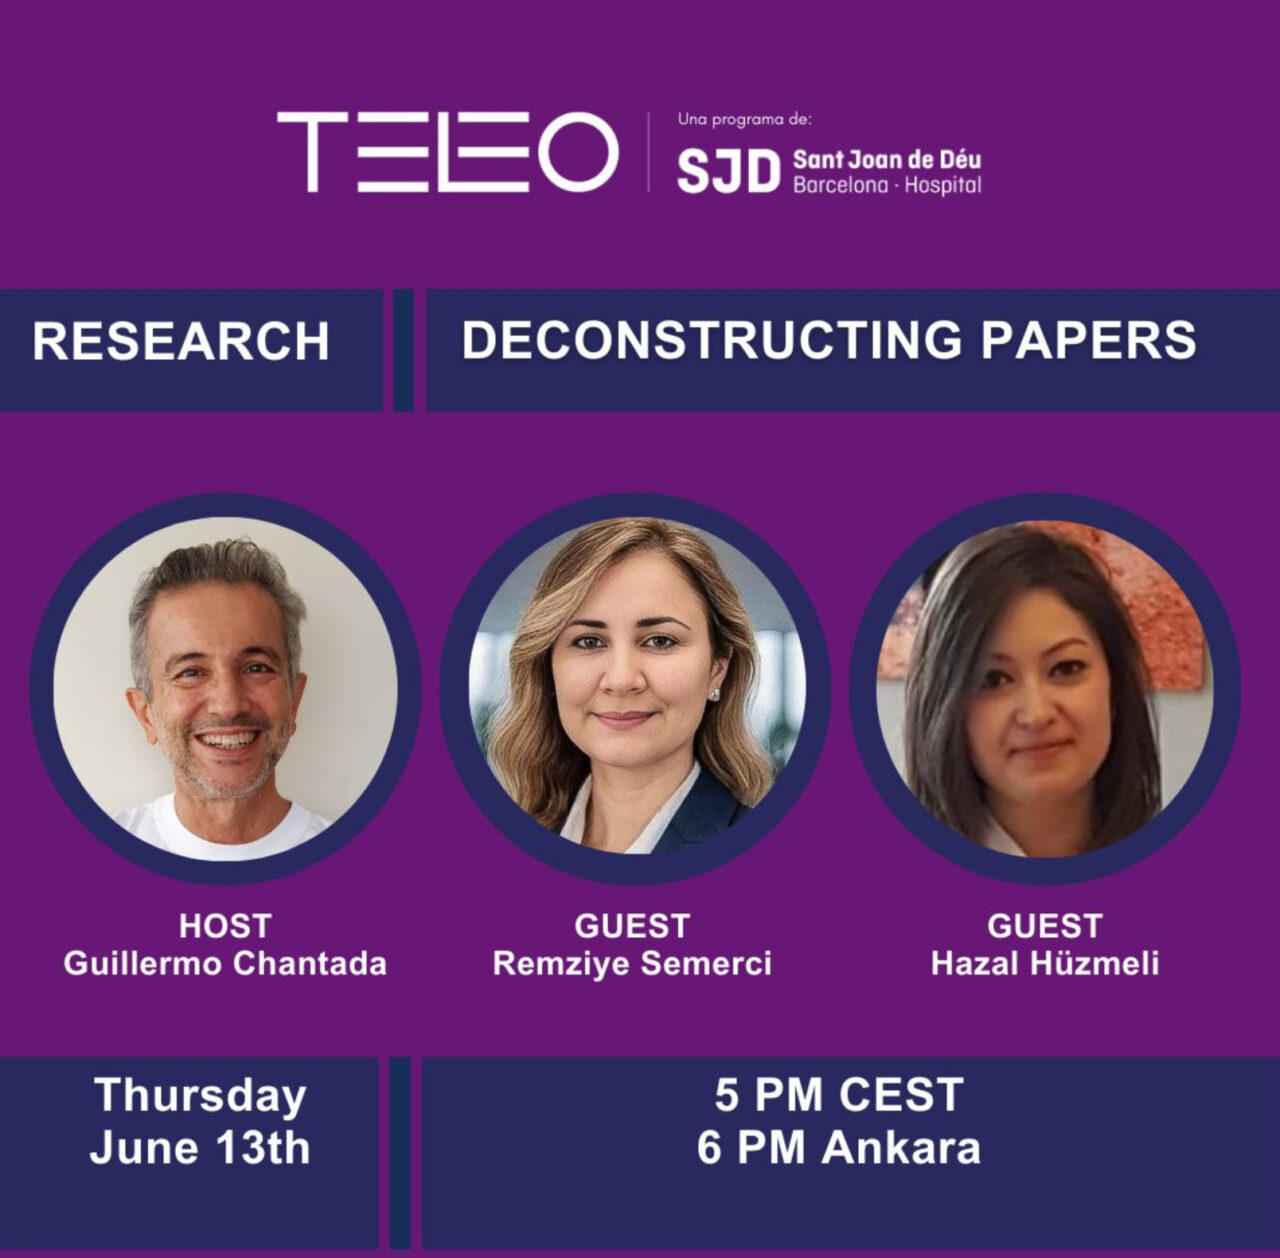 Join us if you are interested in pediatric oncology research – Programa TELEO